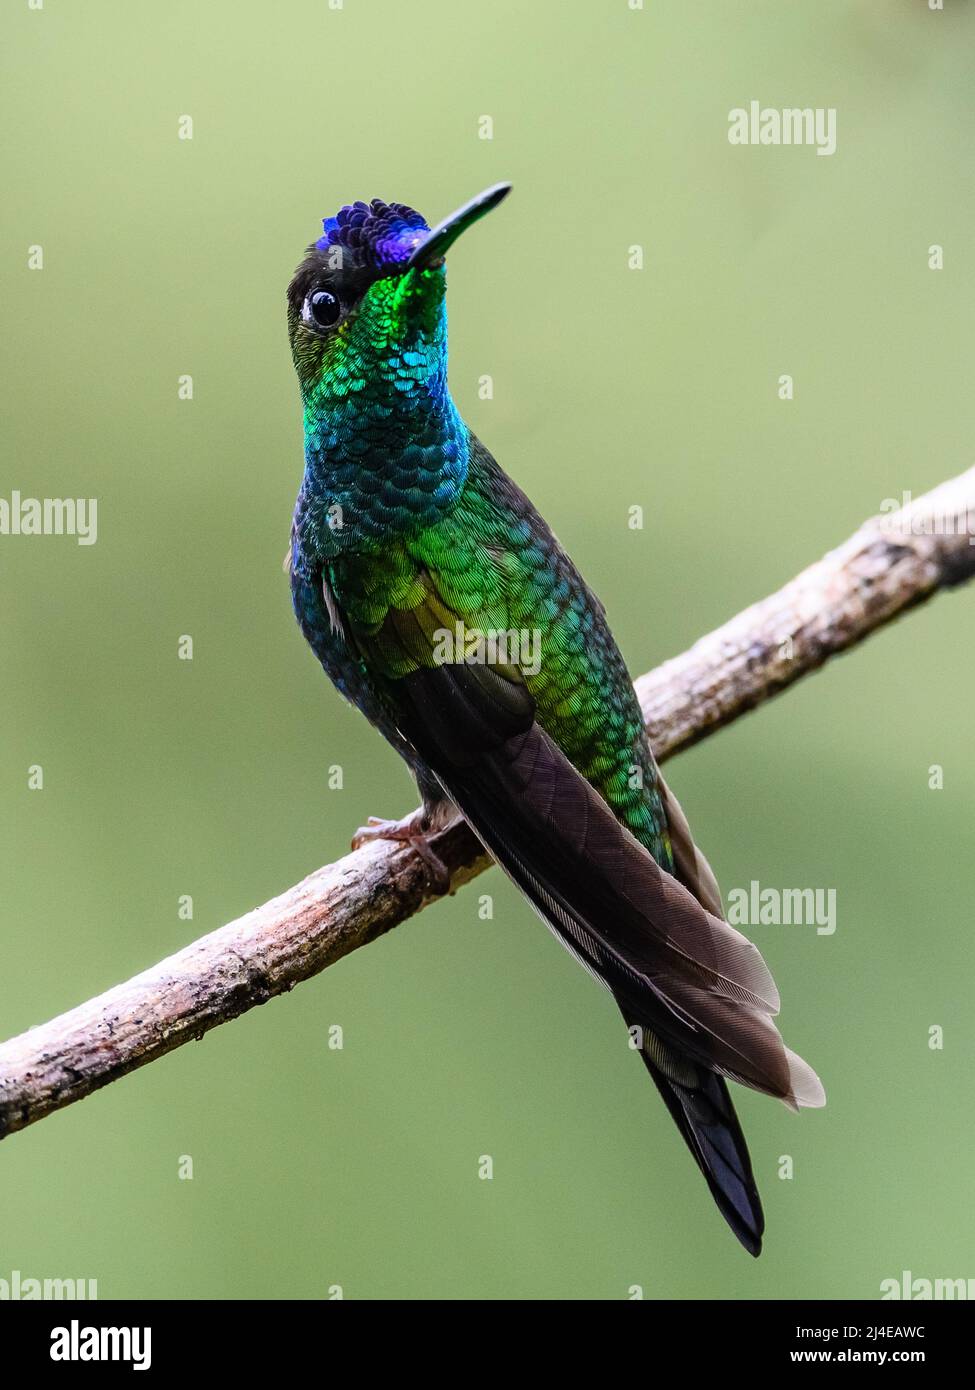 A male Violet-fronted Brilliant hummingbird (Heliodoxa leadbeateri) perched on a branch. Colombia, South America. Stock Photo